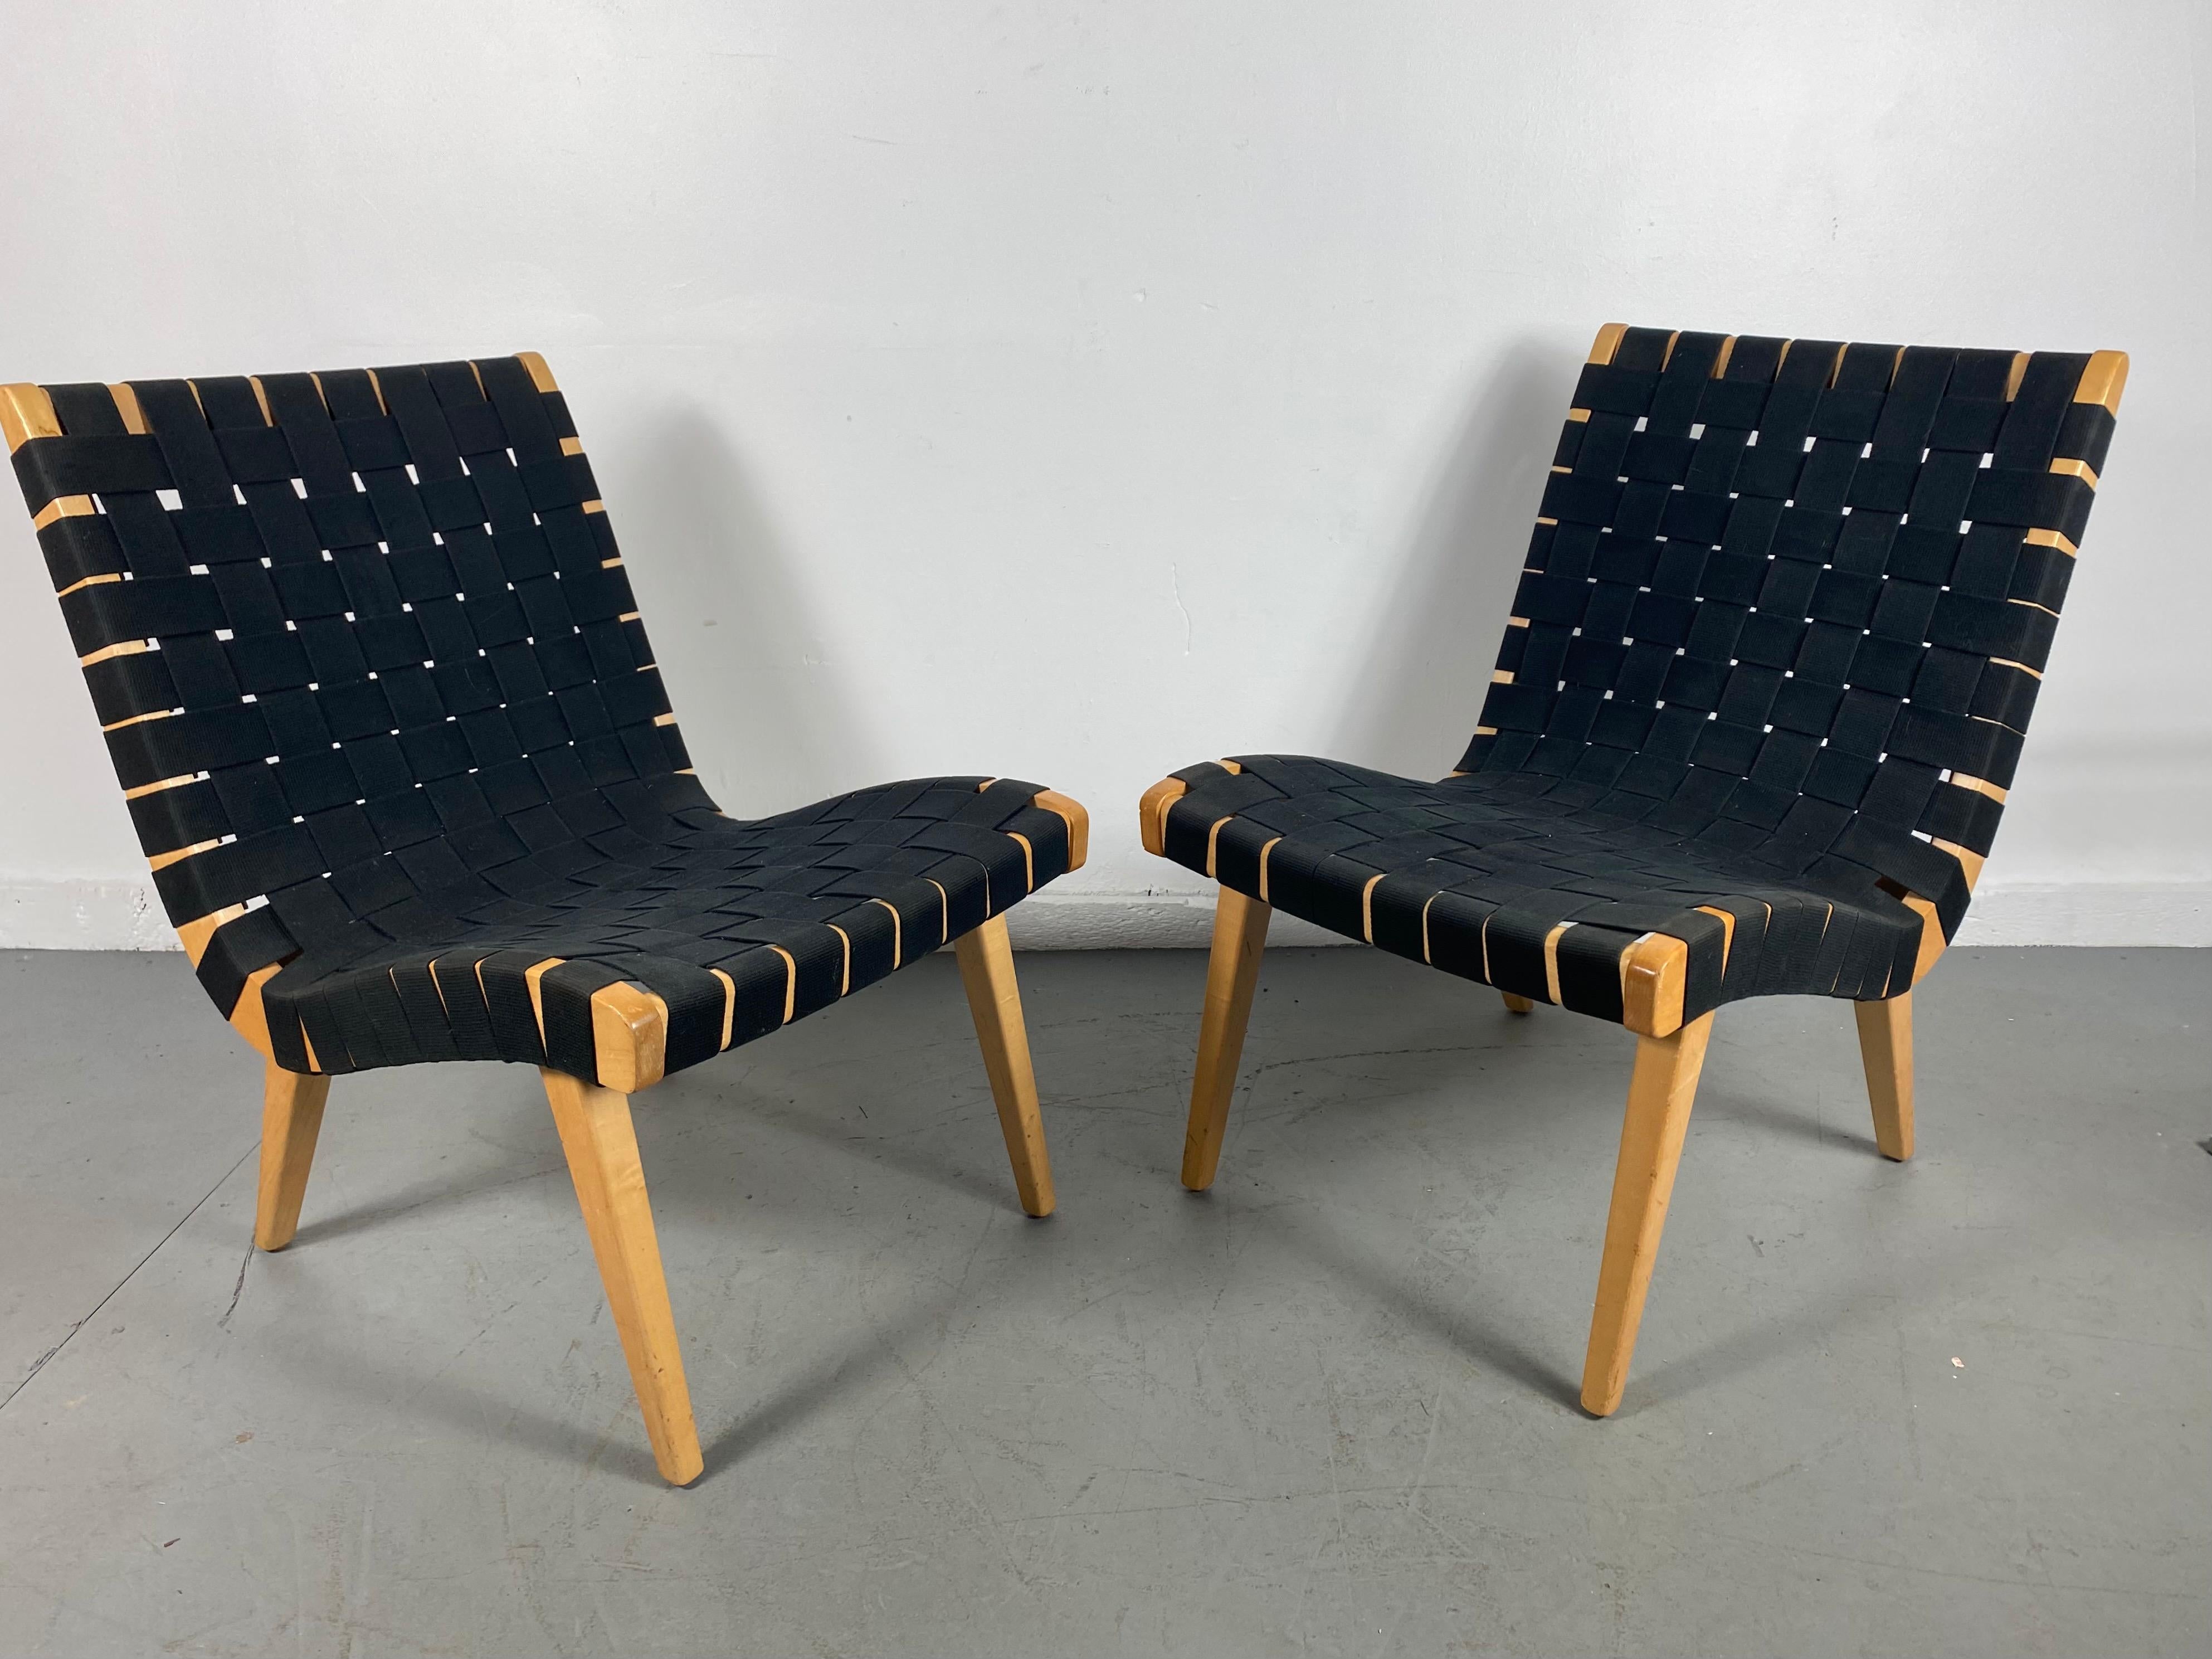 Pair of Jens Risom Webbed lounge chairs, Risom / Knoll, Classic Modernist, Jens Risom reintroduced webbed lounge chair. Originally designed in the late 1940s. These chairs are about 30 years old. Black webbing and birch wood frame. Classic Early